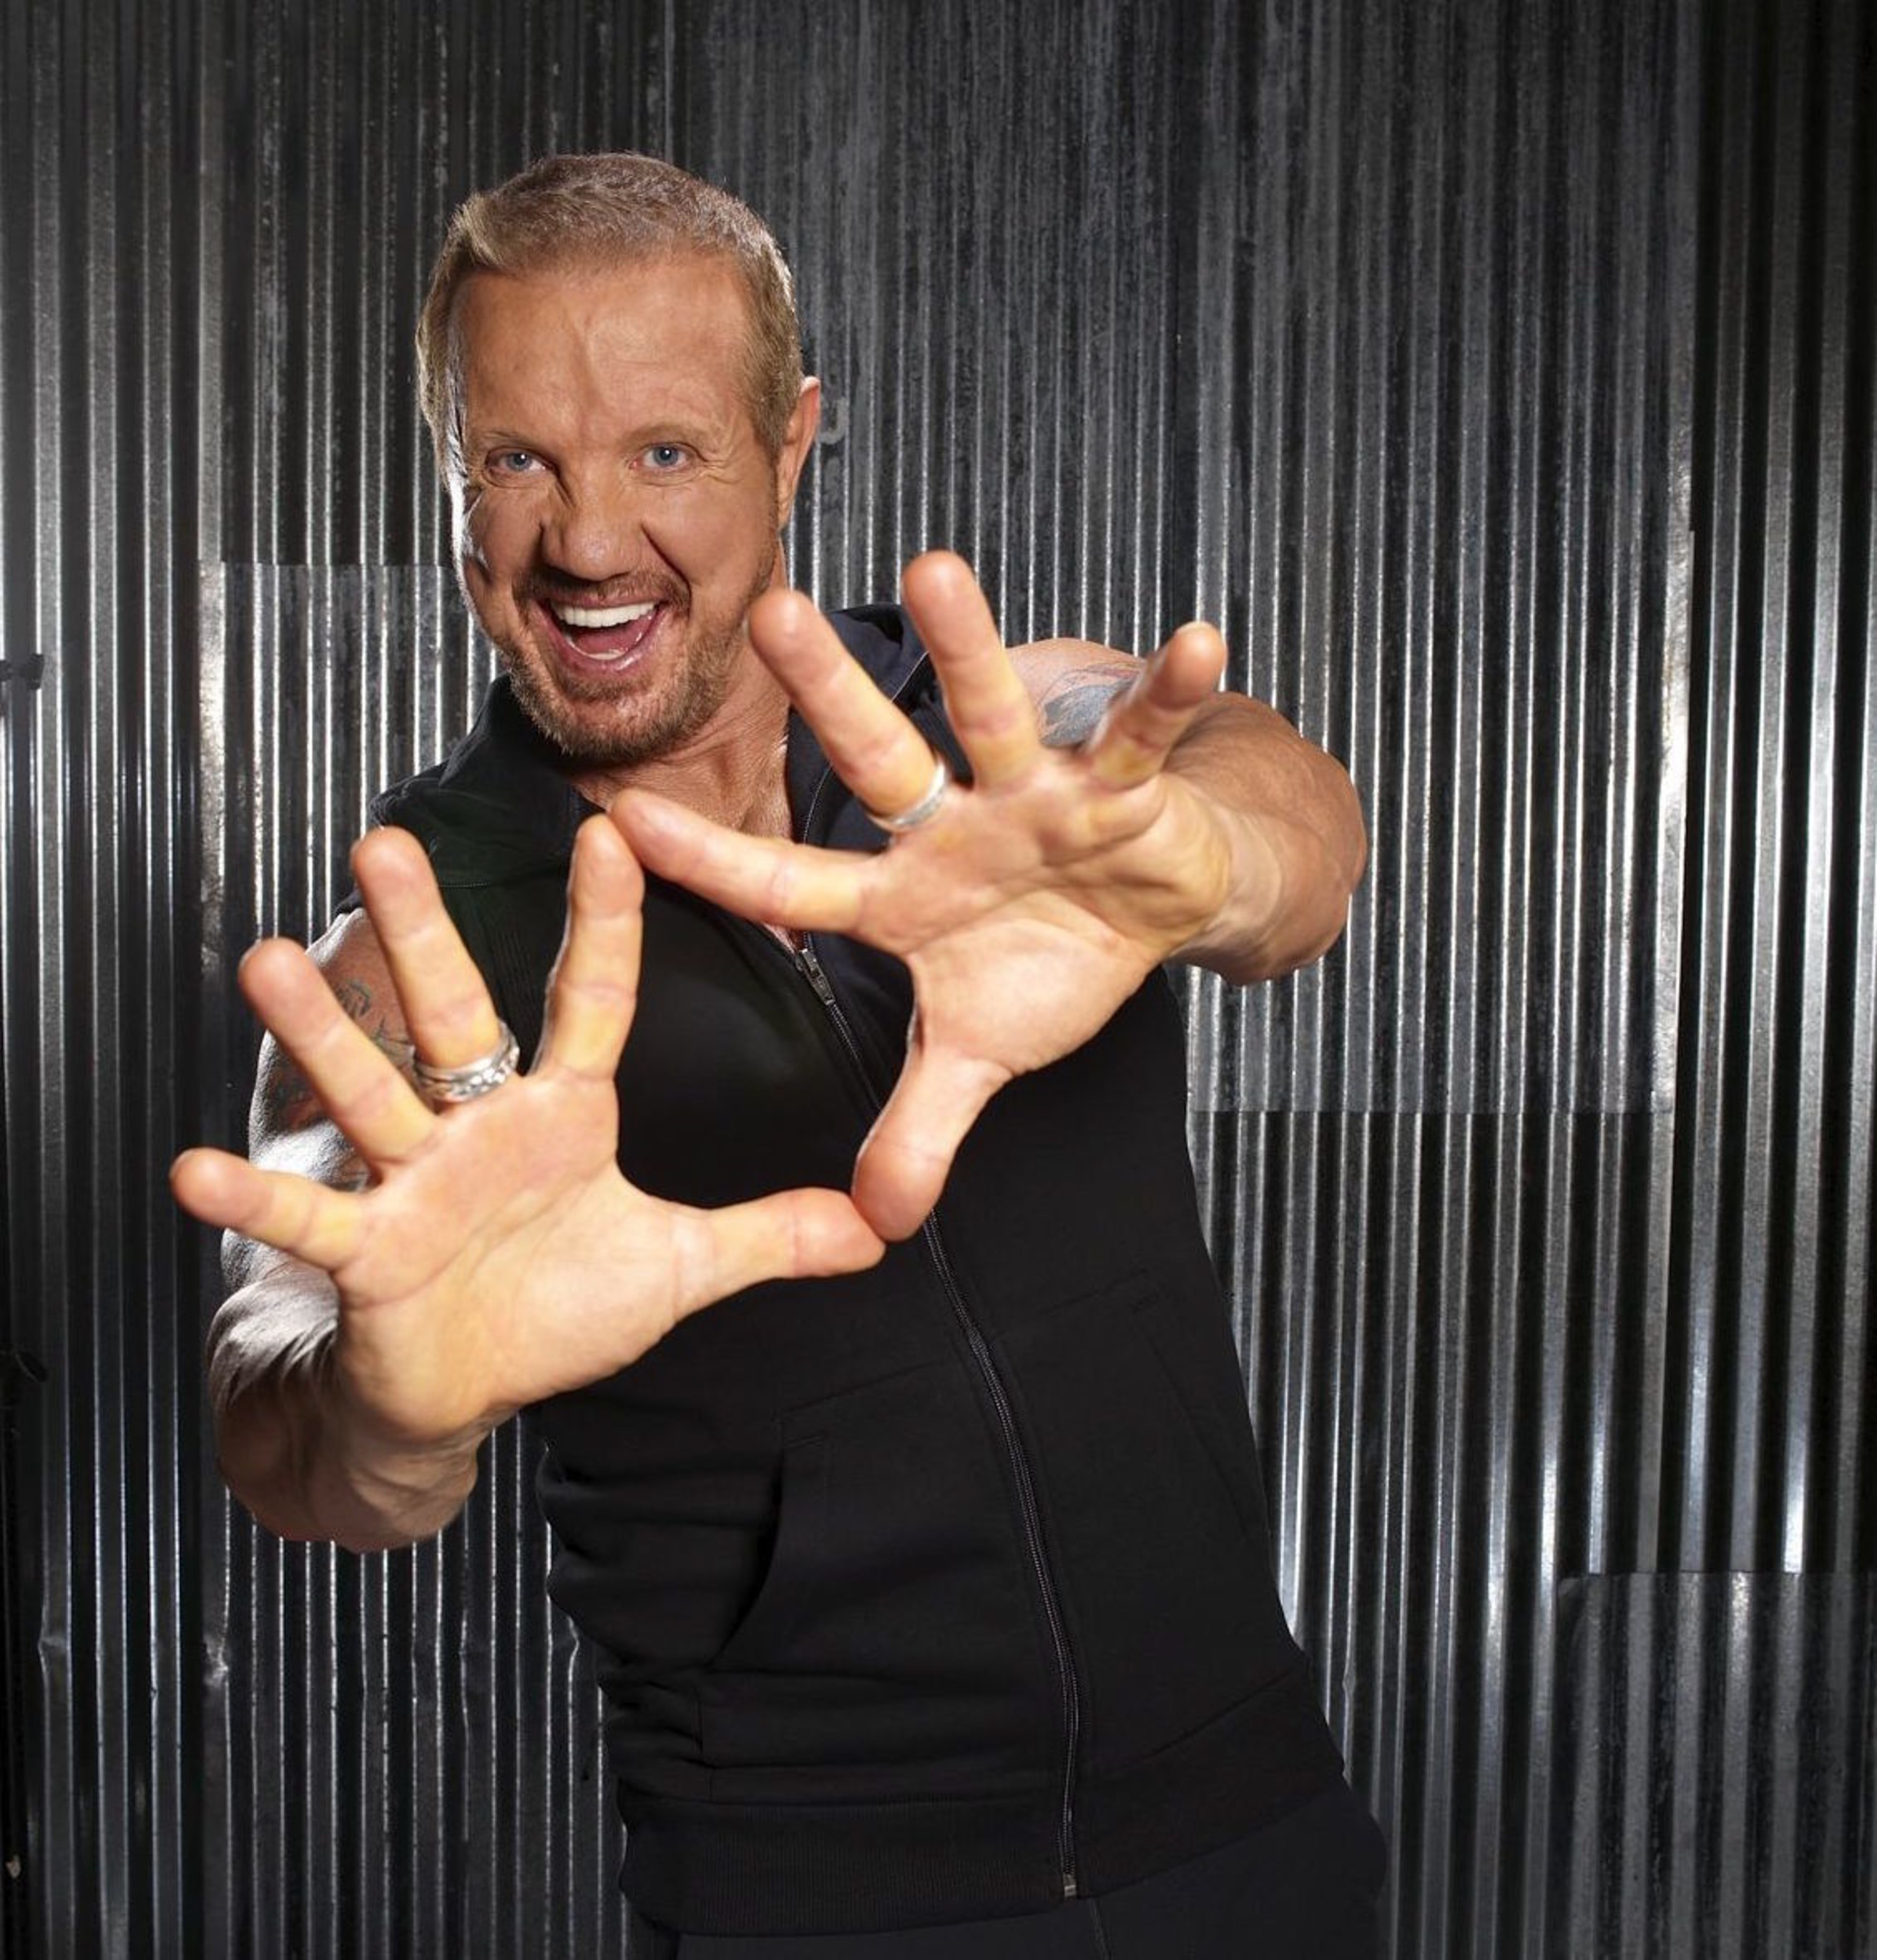 FITE TV Announces Launch of DDP Yoga on Streaming Platform